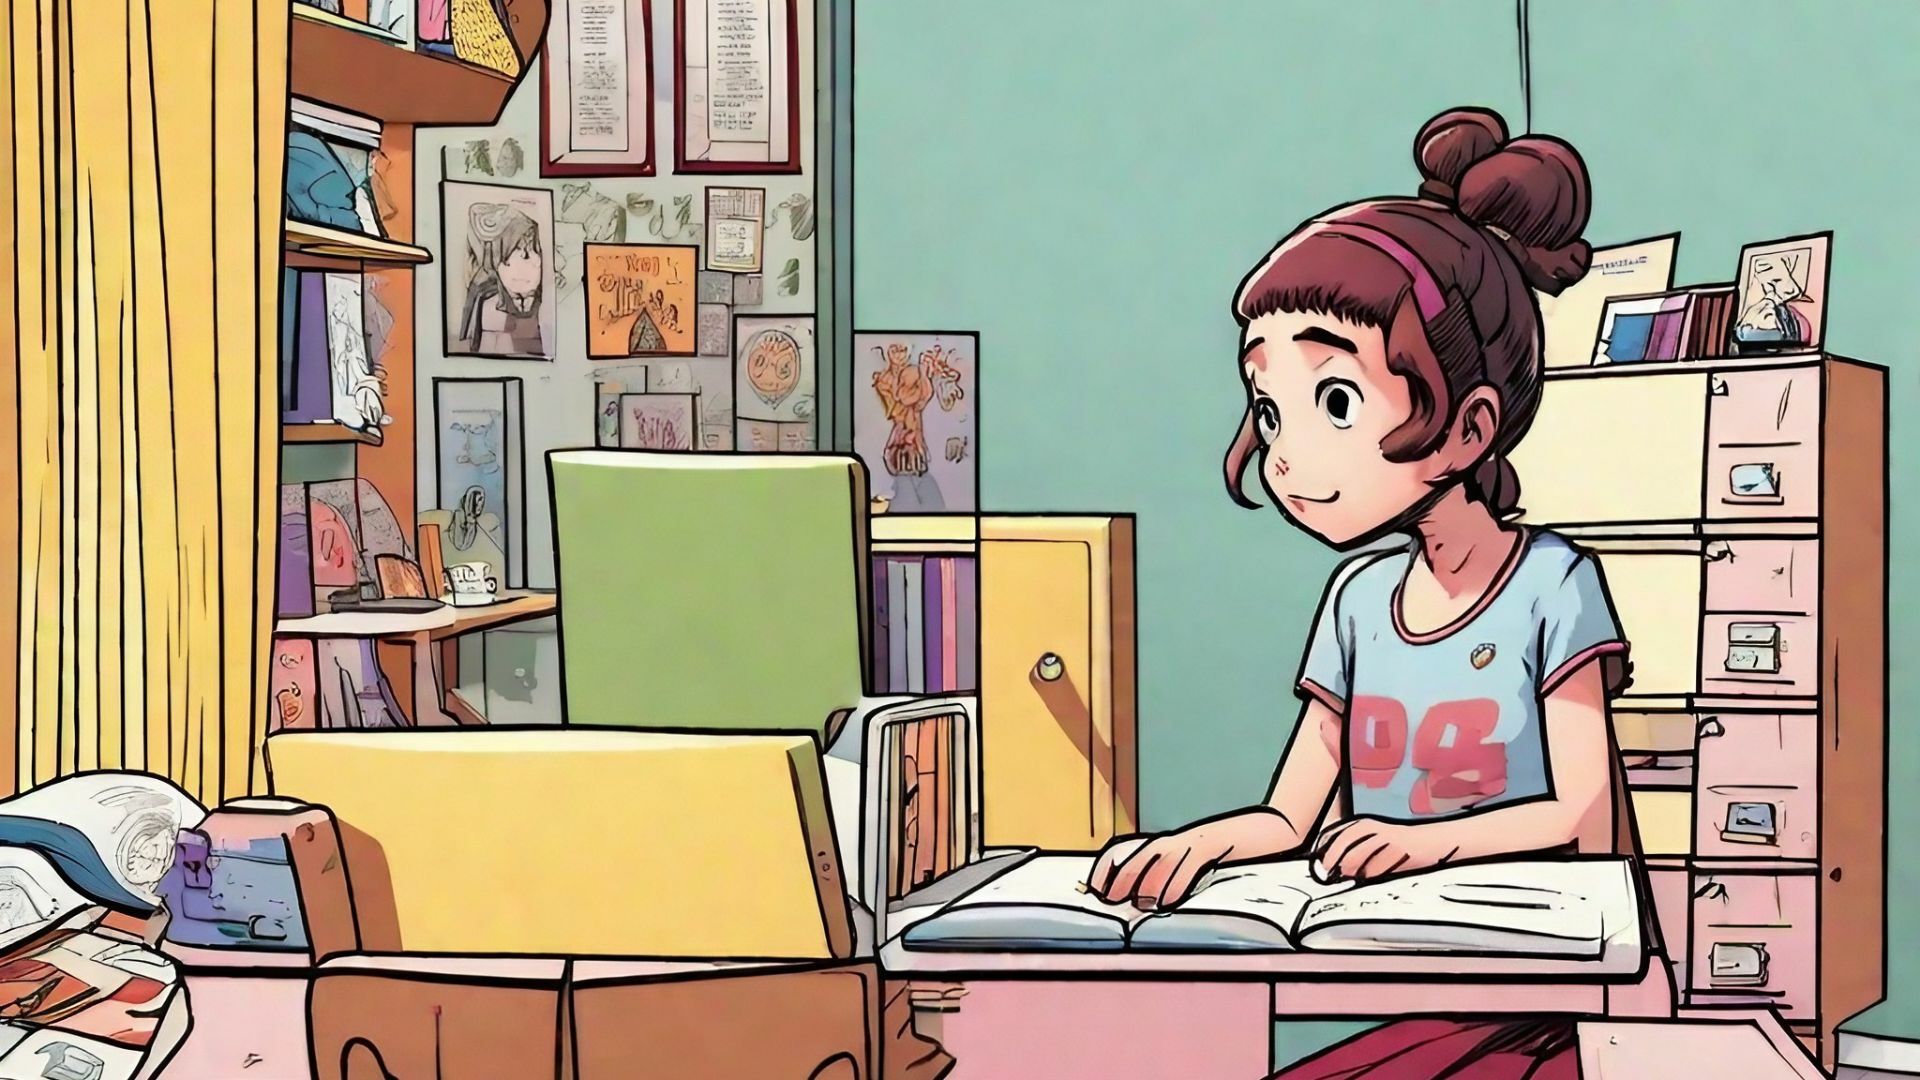 An illustration of a girl sitting at her desk in her bedroom.